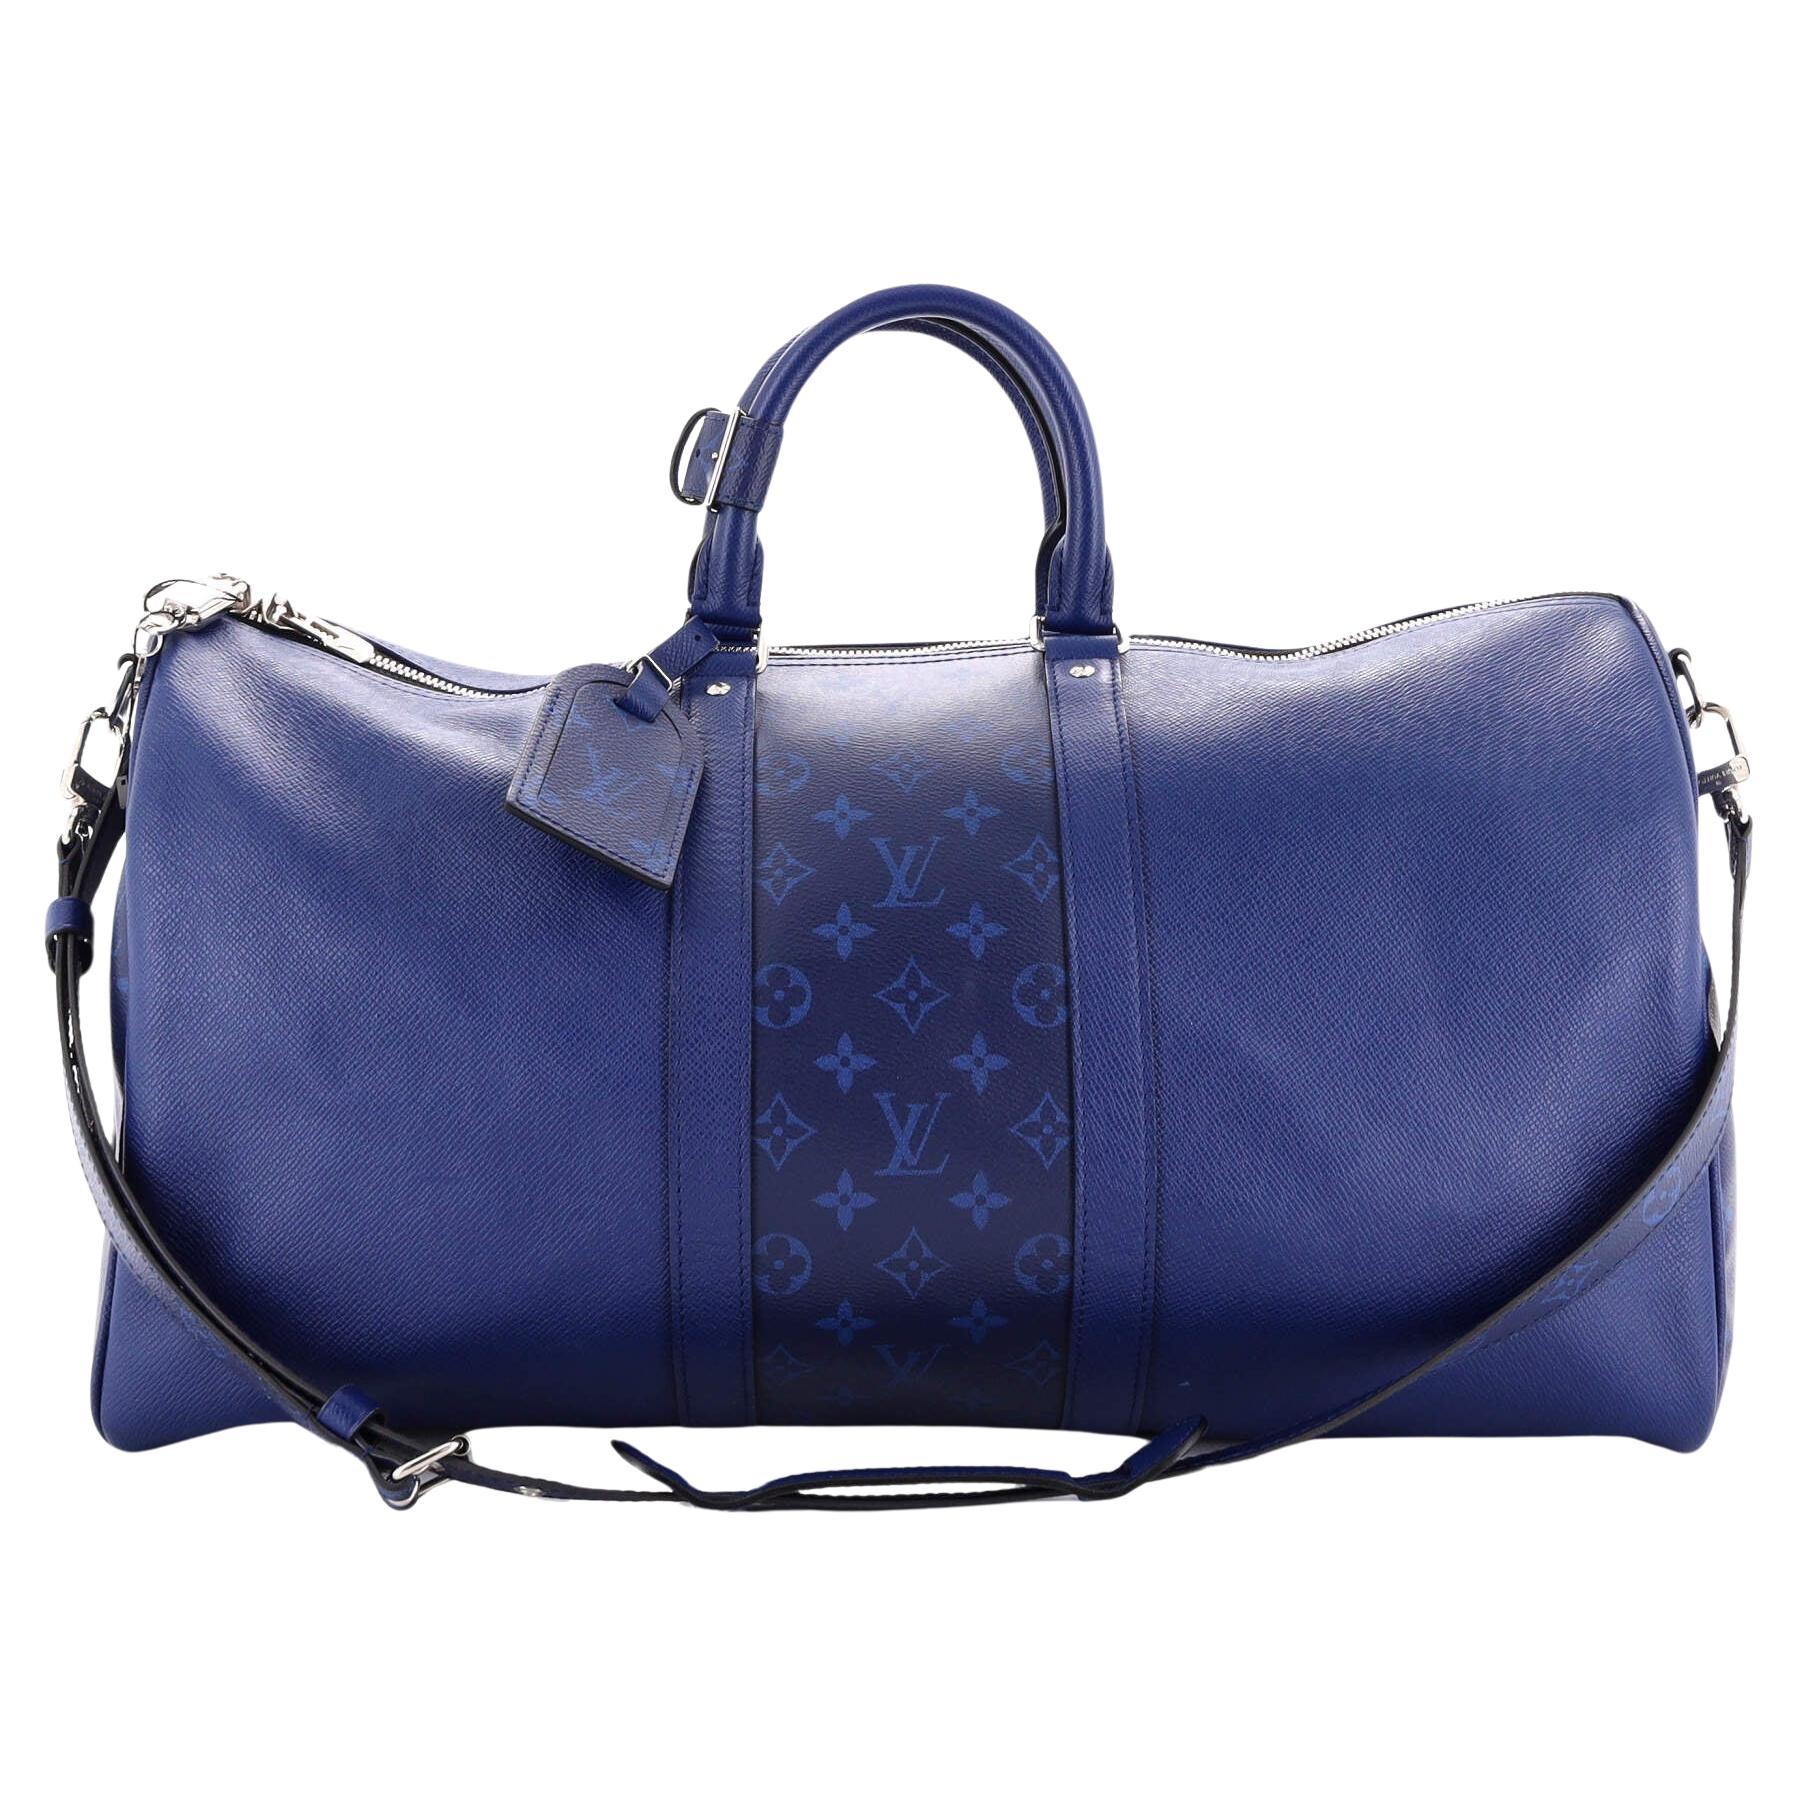 Louis Vuitton Blue Mesh Triangle Keepall 50 Limited Edition Duffle